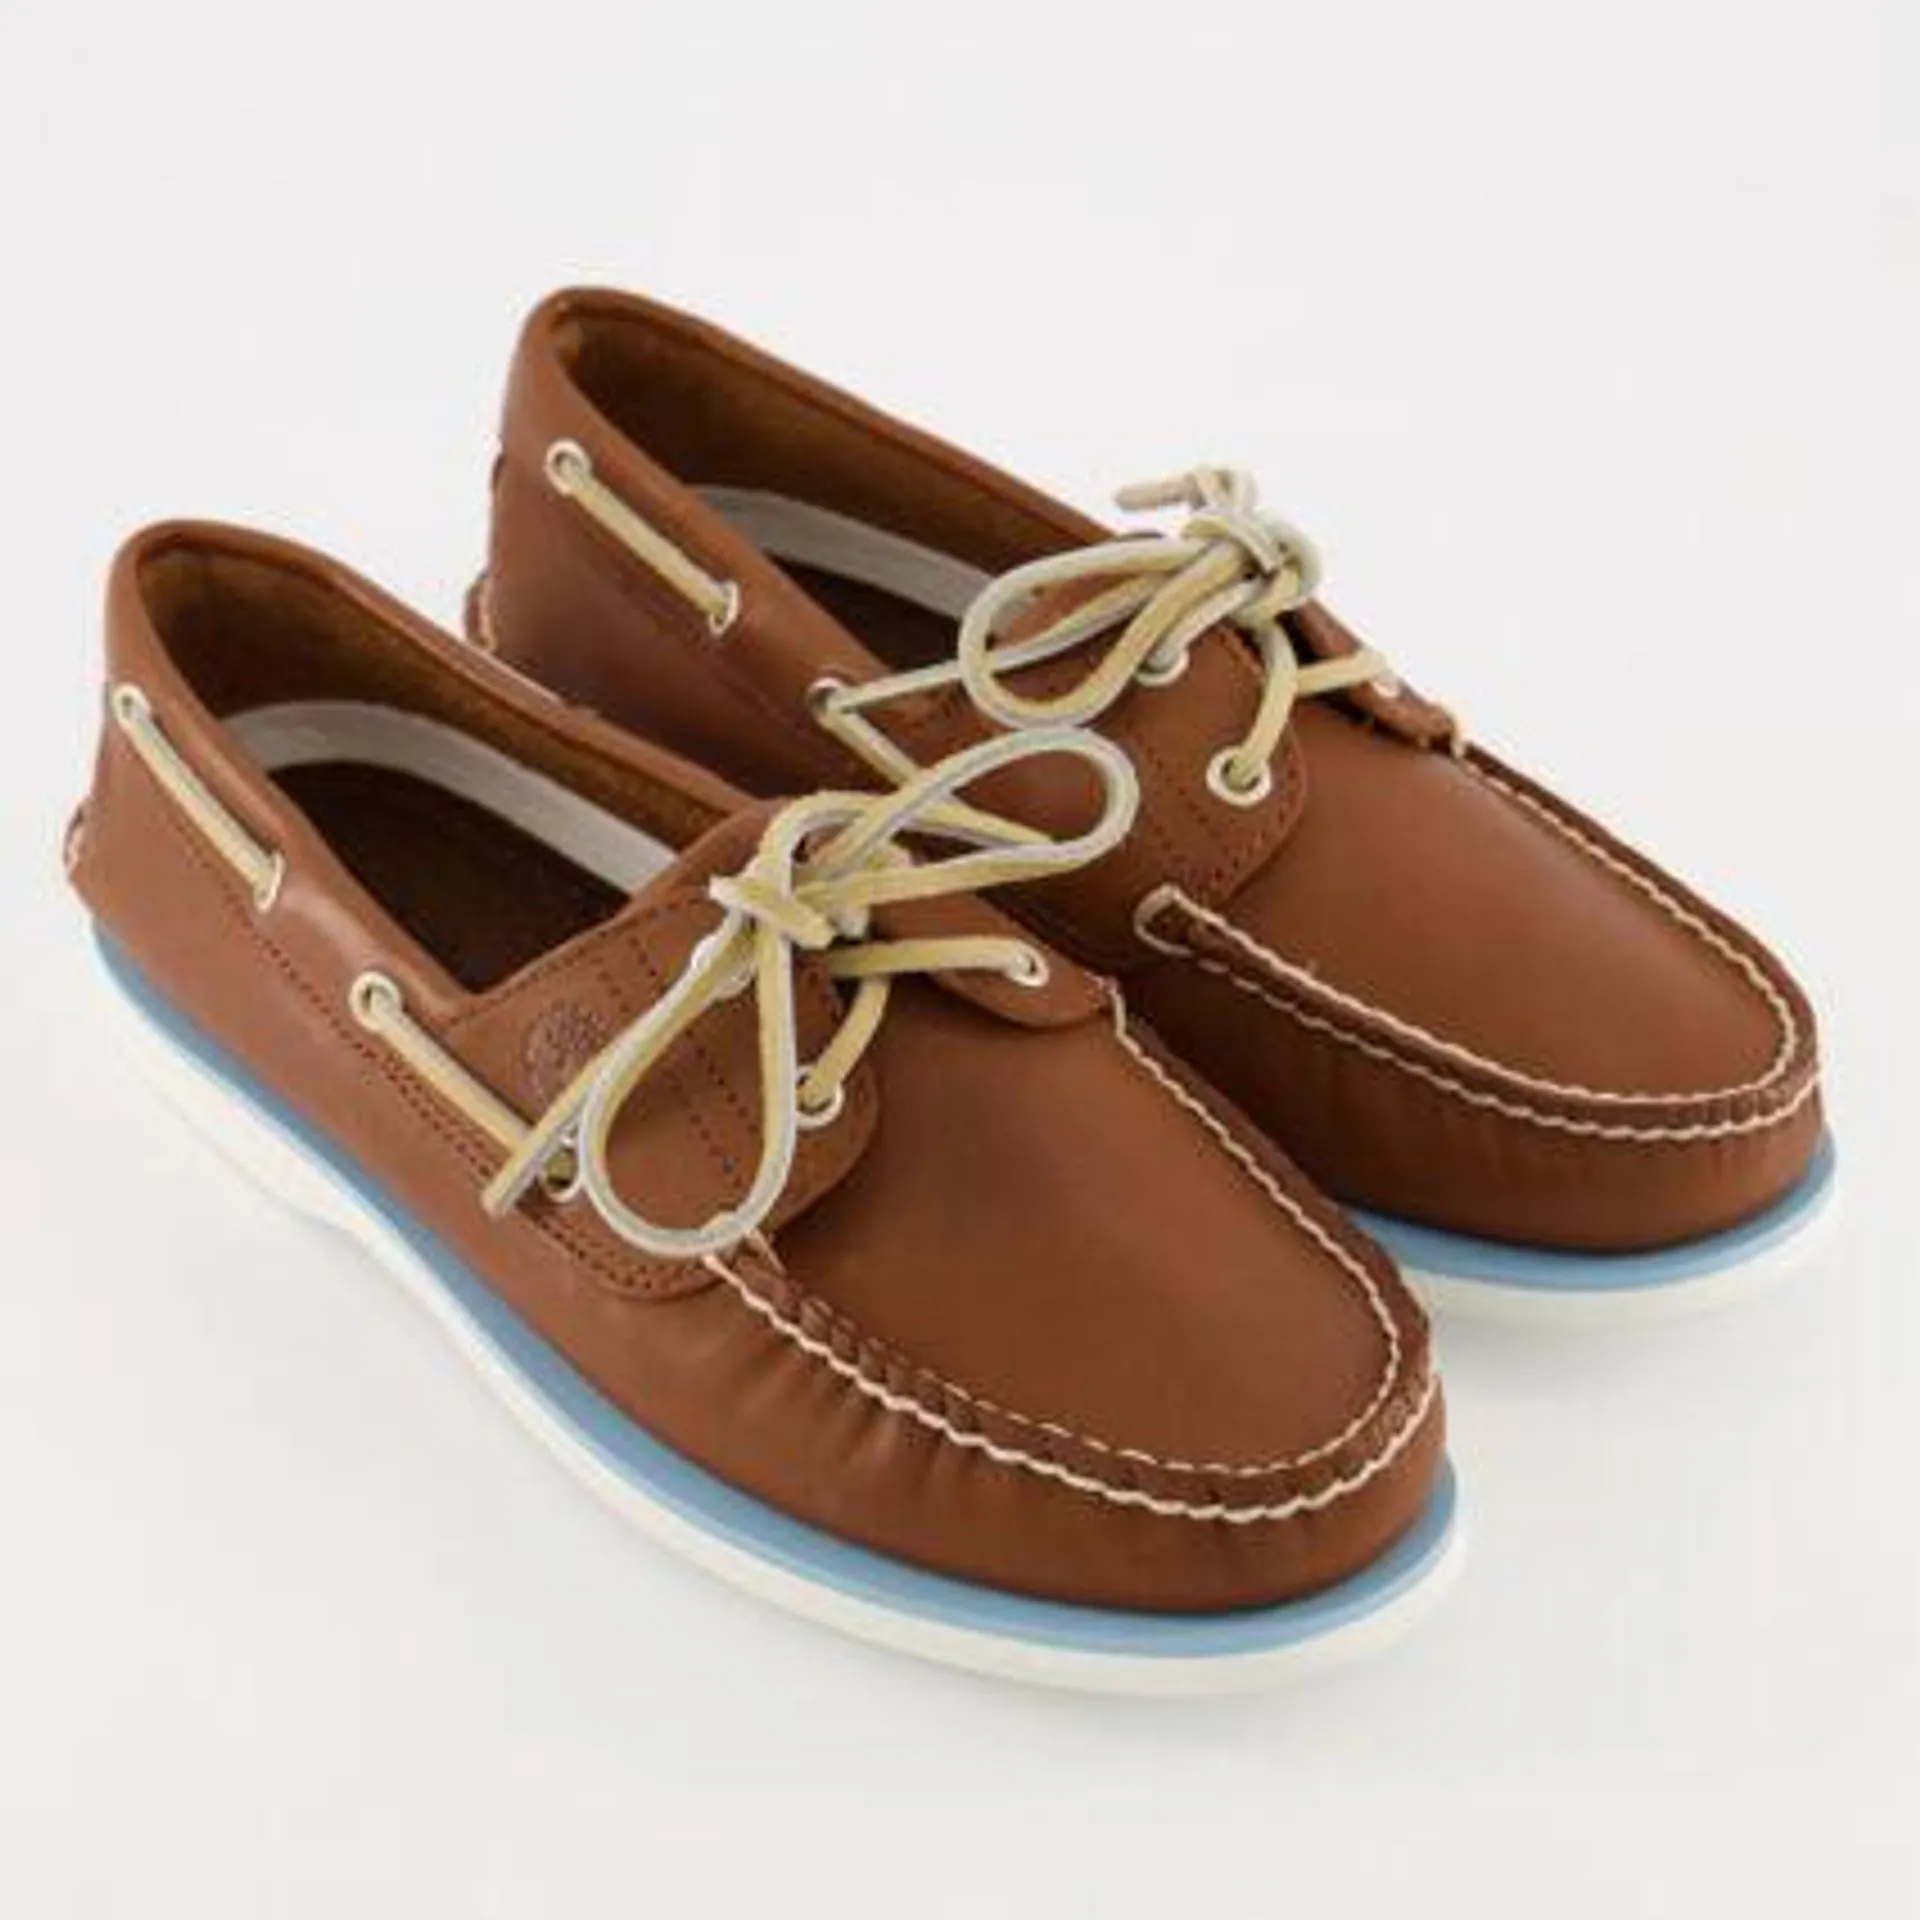 Brown Leather Classic Boat Shoes